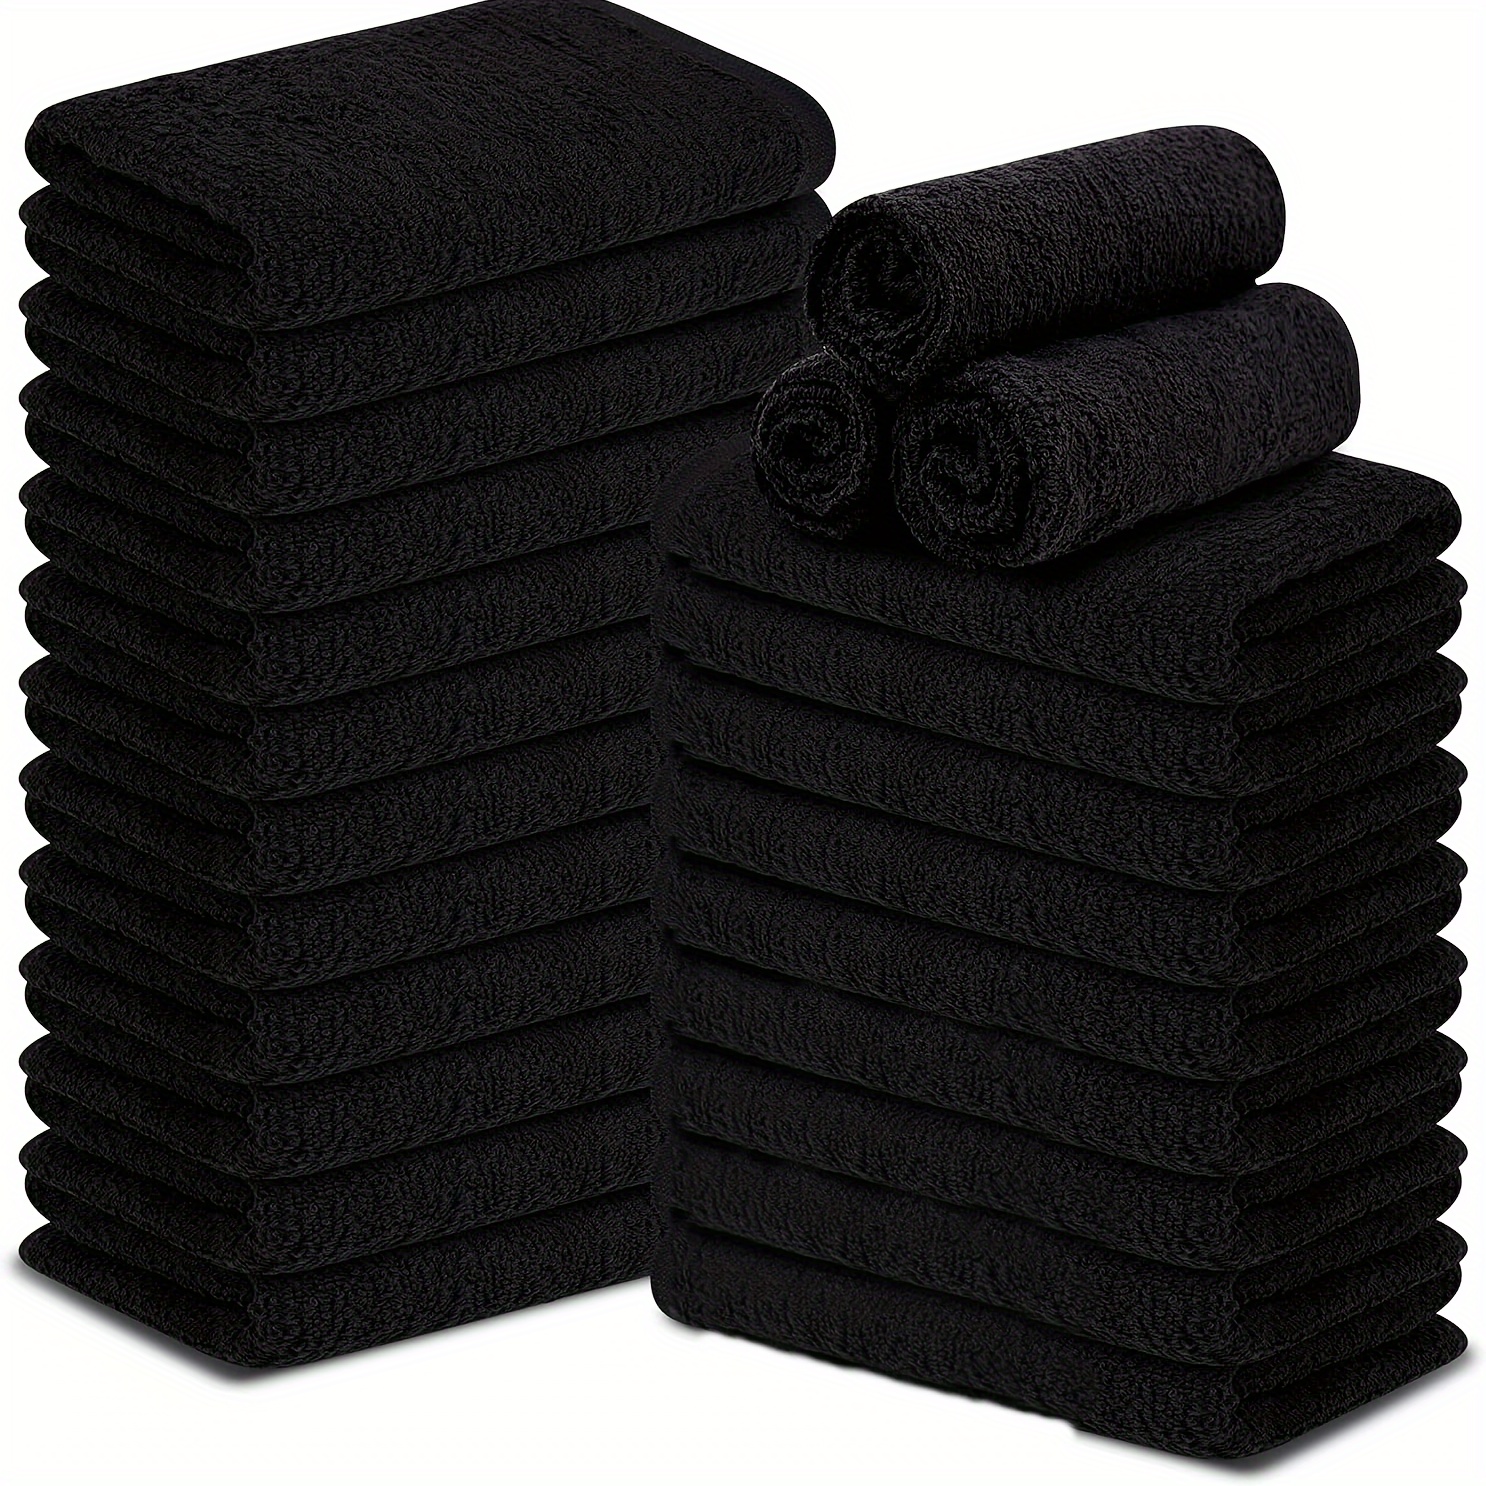 

6pcs Makeup Remover Towel Set, Strong Water Absorption, Soft Towel For Bathroom, Spa, And Gyms